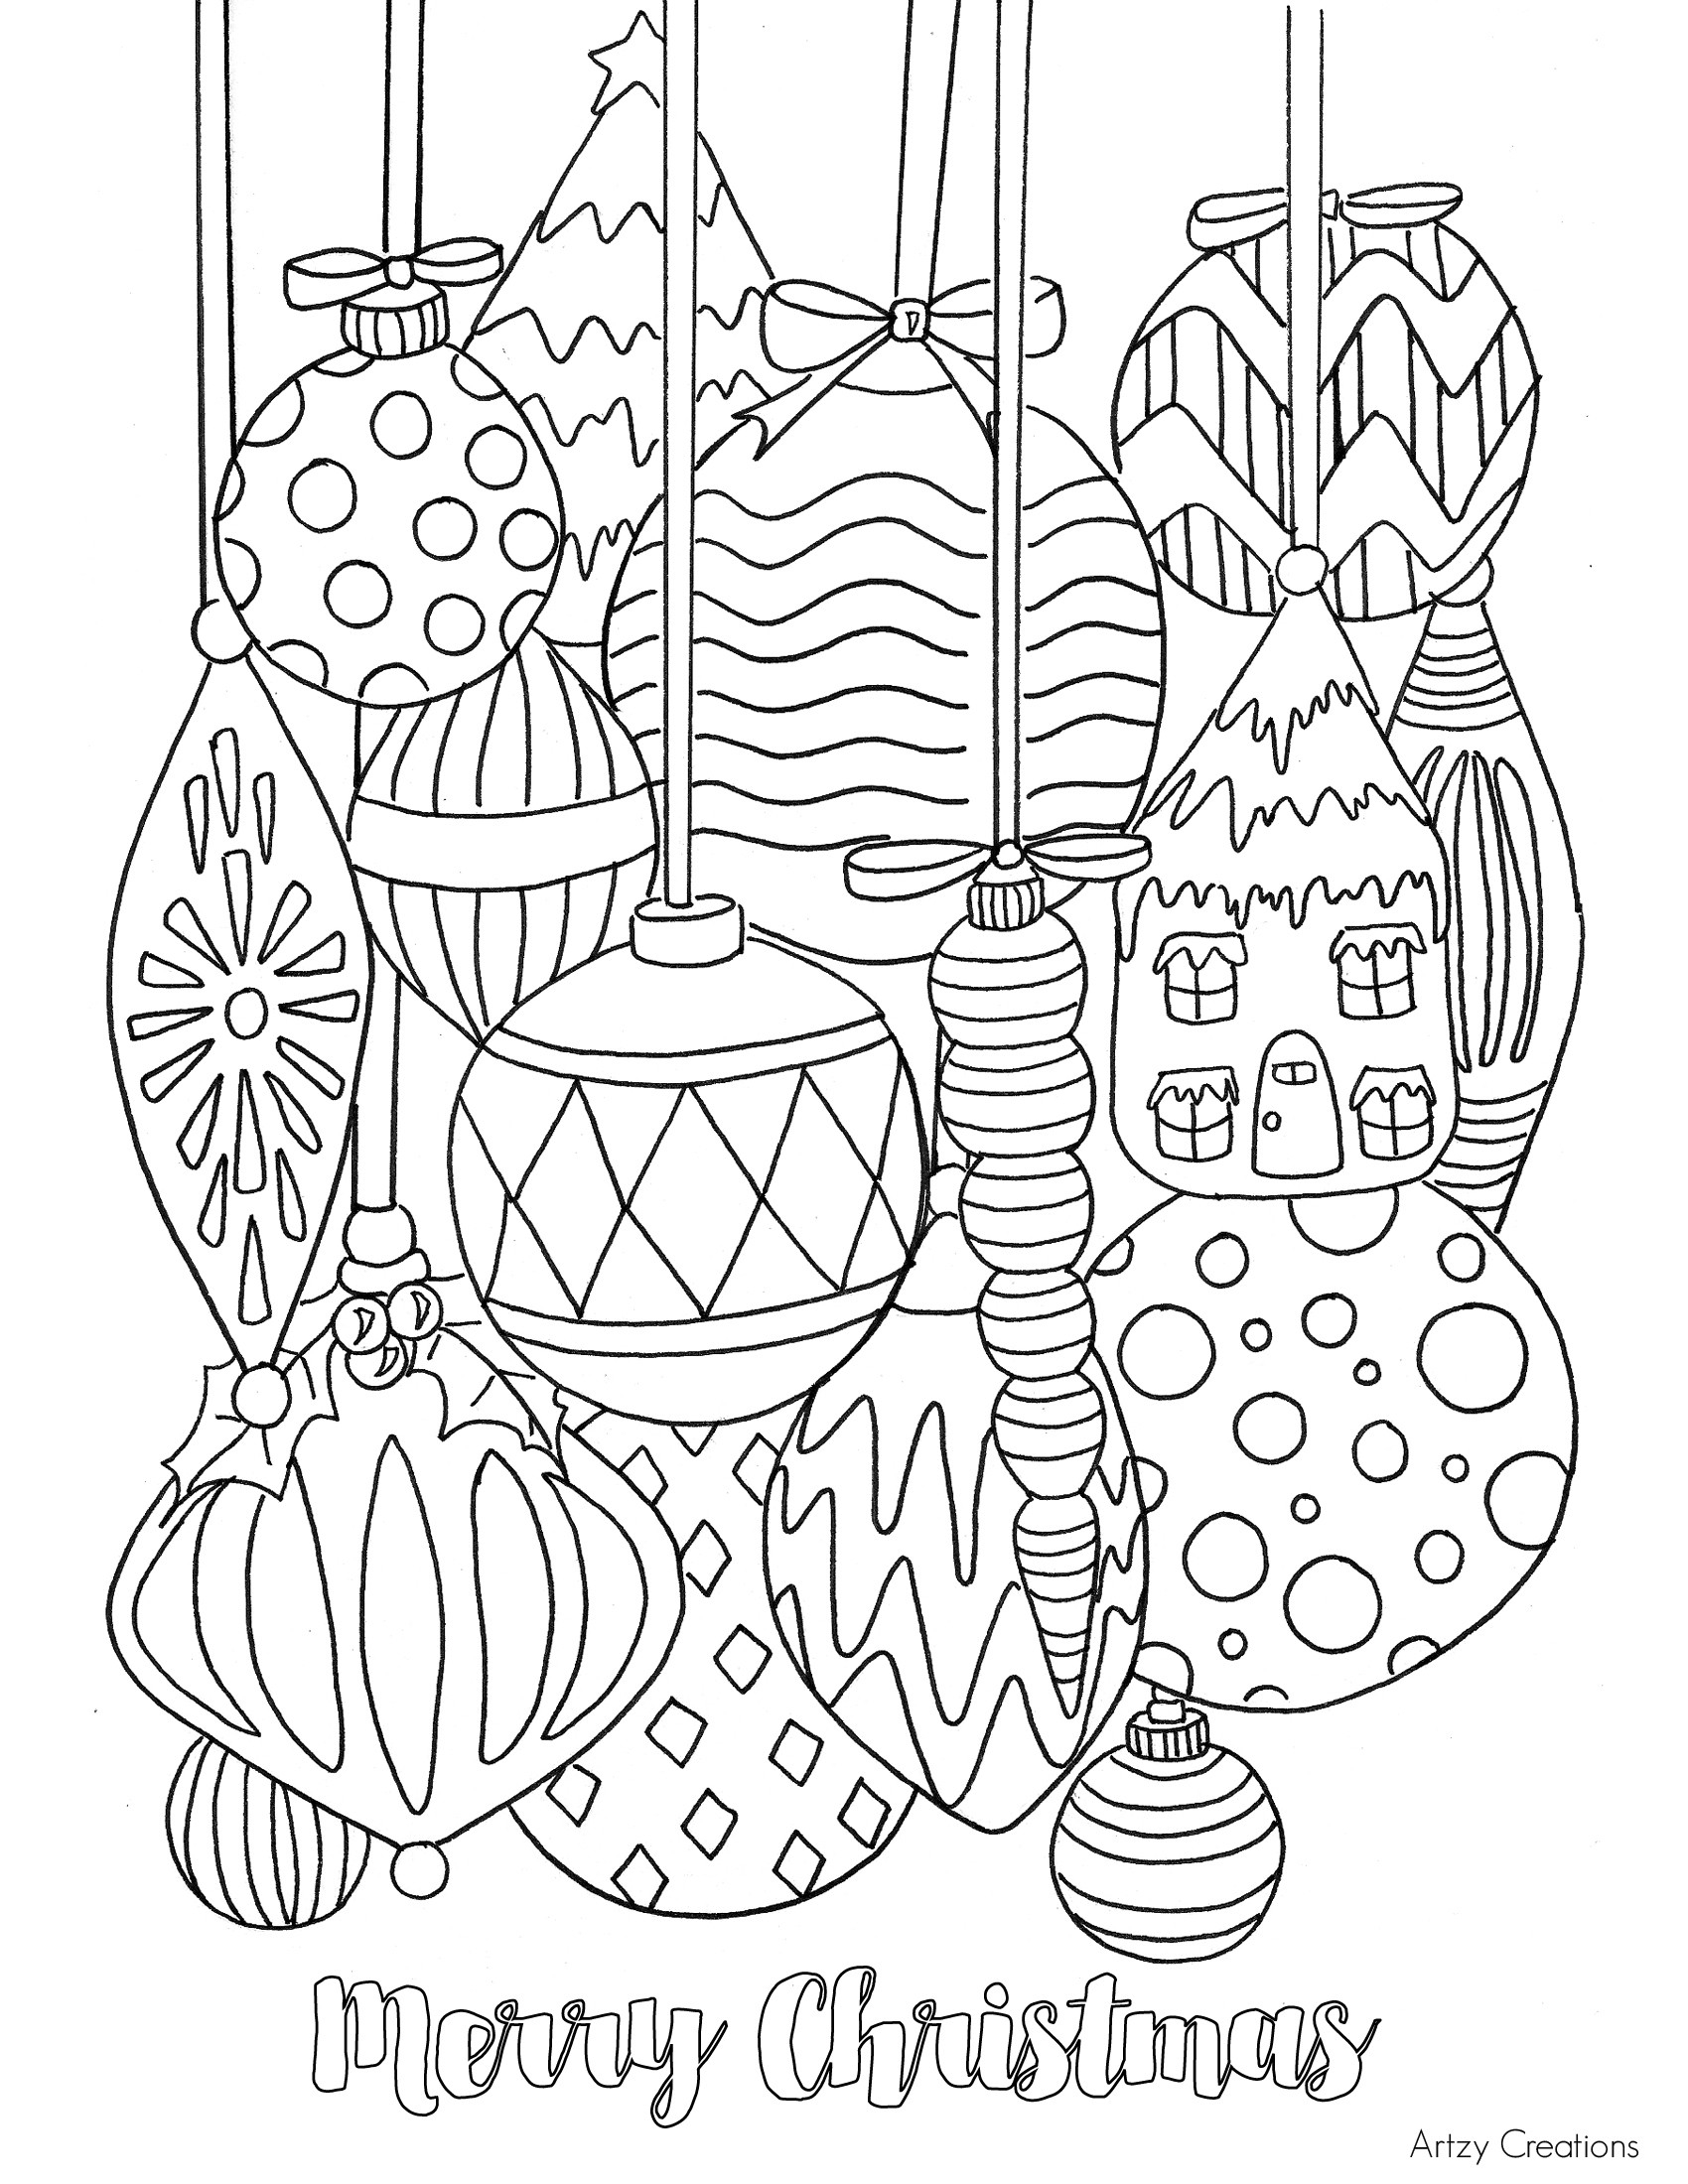 Superman Christmas Coloring Pages Startearlyrun Part 2